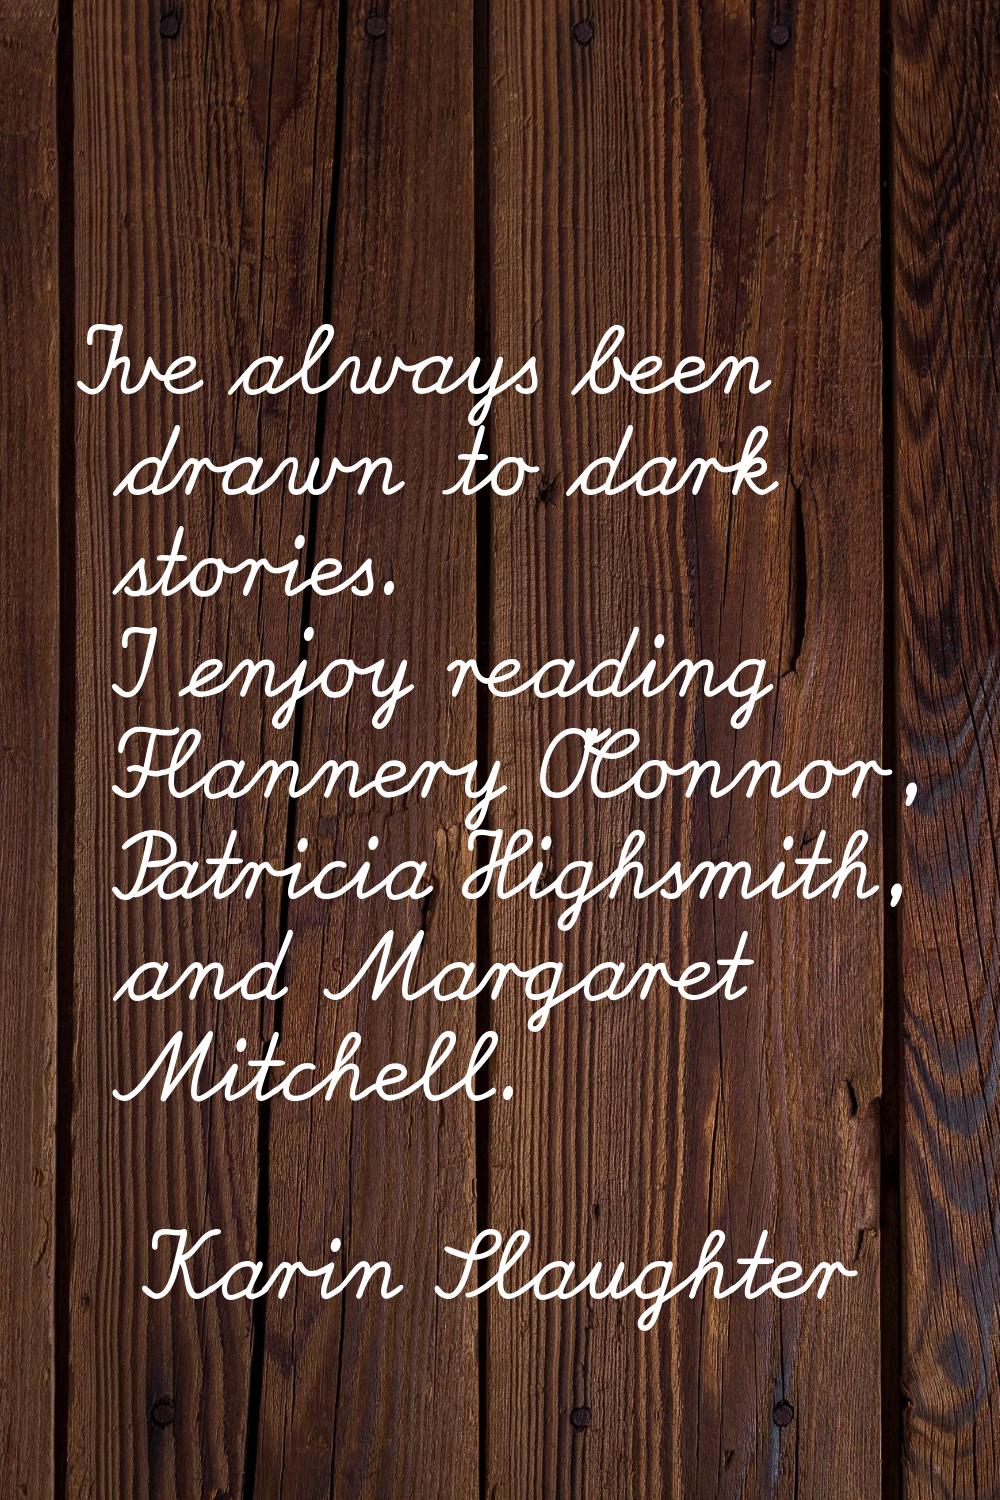 I've always been drawn to dark stories. I enjoy reading Flannery O'Connor, Patricia Highsmith, and 